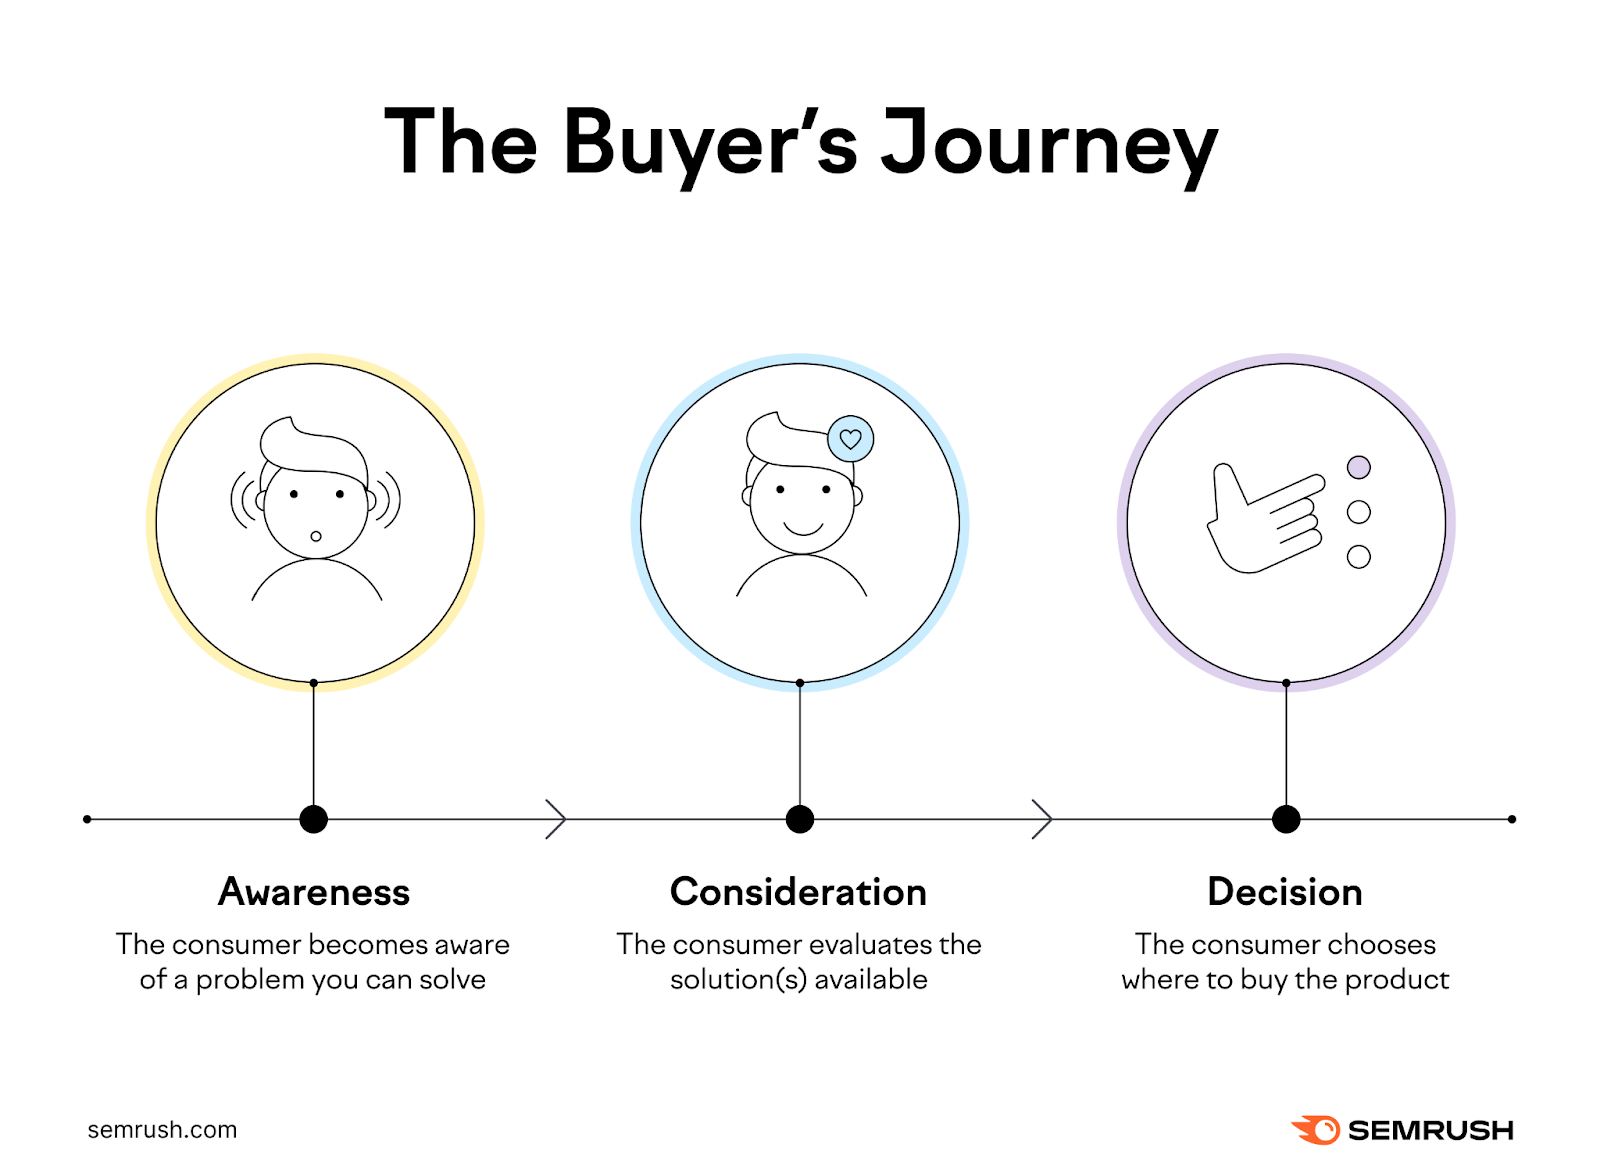 Timeline of "The Buyer's Journey": awareness, consideration and decision.